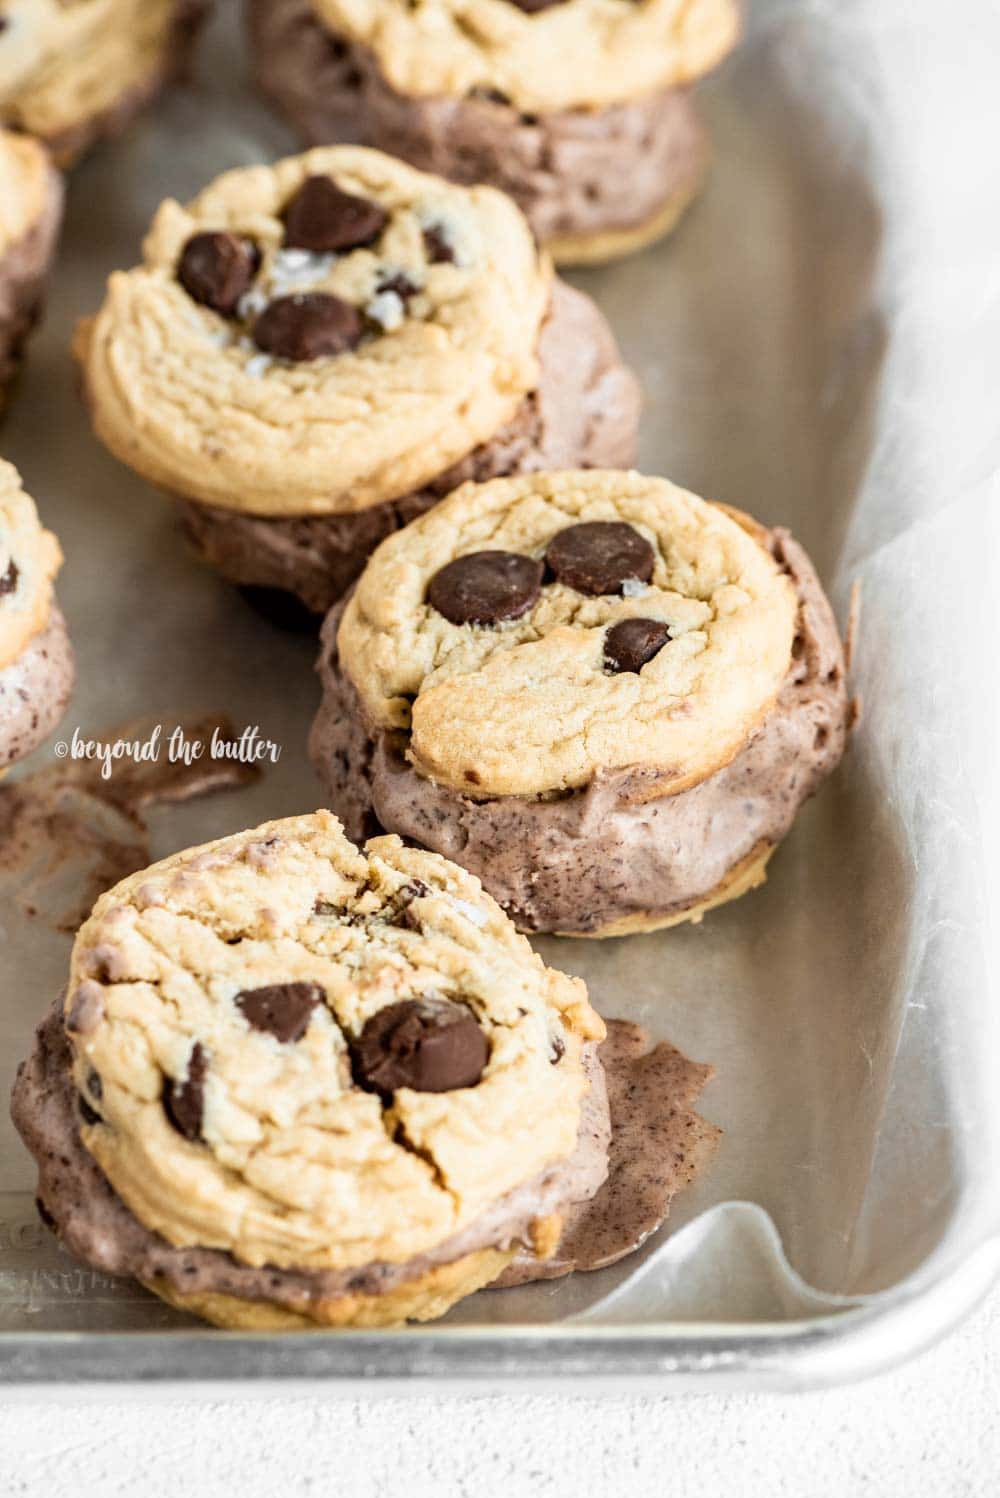 Easy Homemade Ice Cream Cookie Sandwiches with No-Churn Chocolate Ice Cream | All Images © Beyond the Butter, LLC